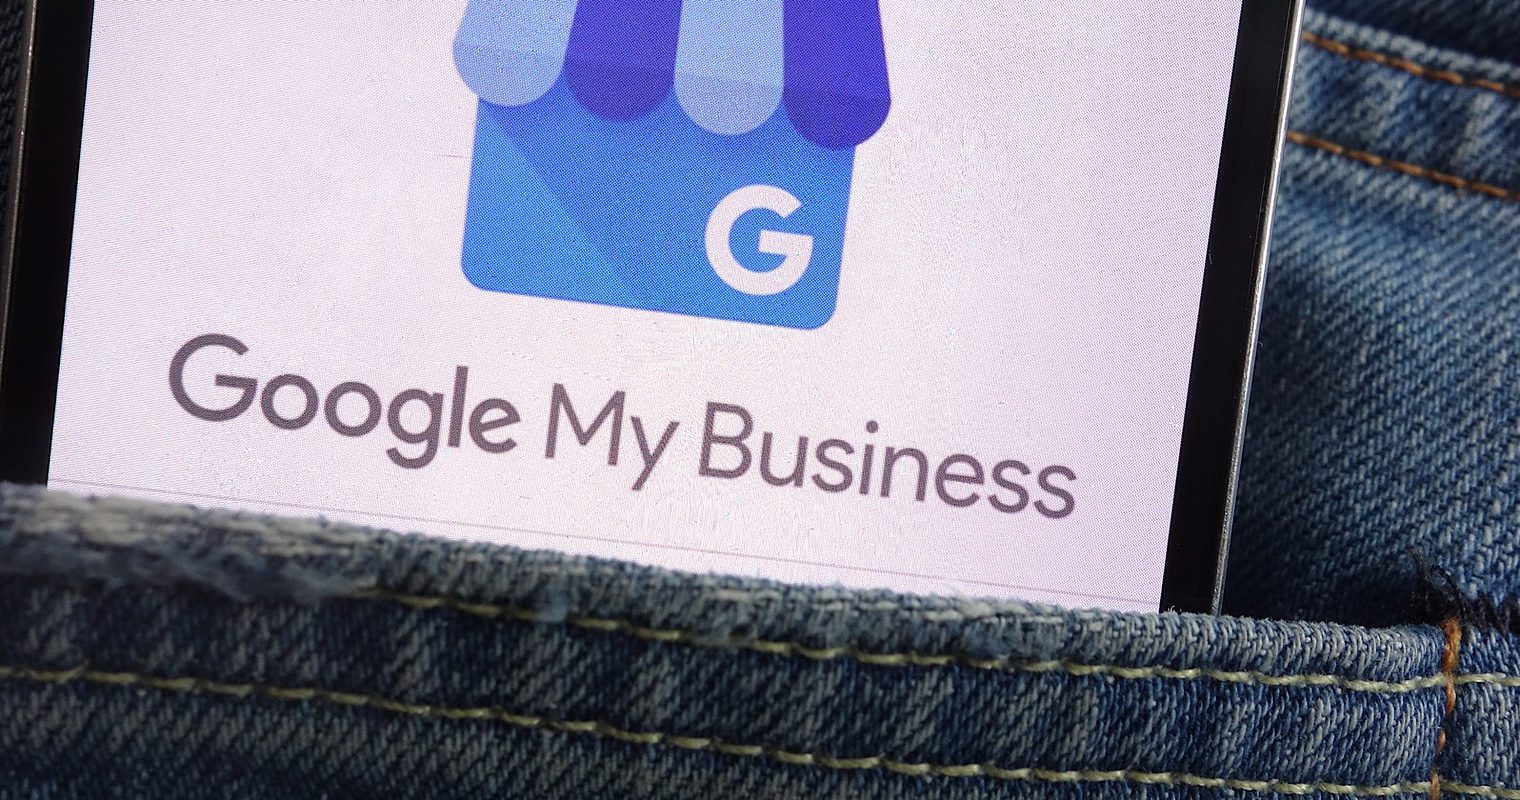 Google My Business Adds New Post Types for Products and Offers